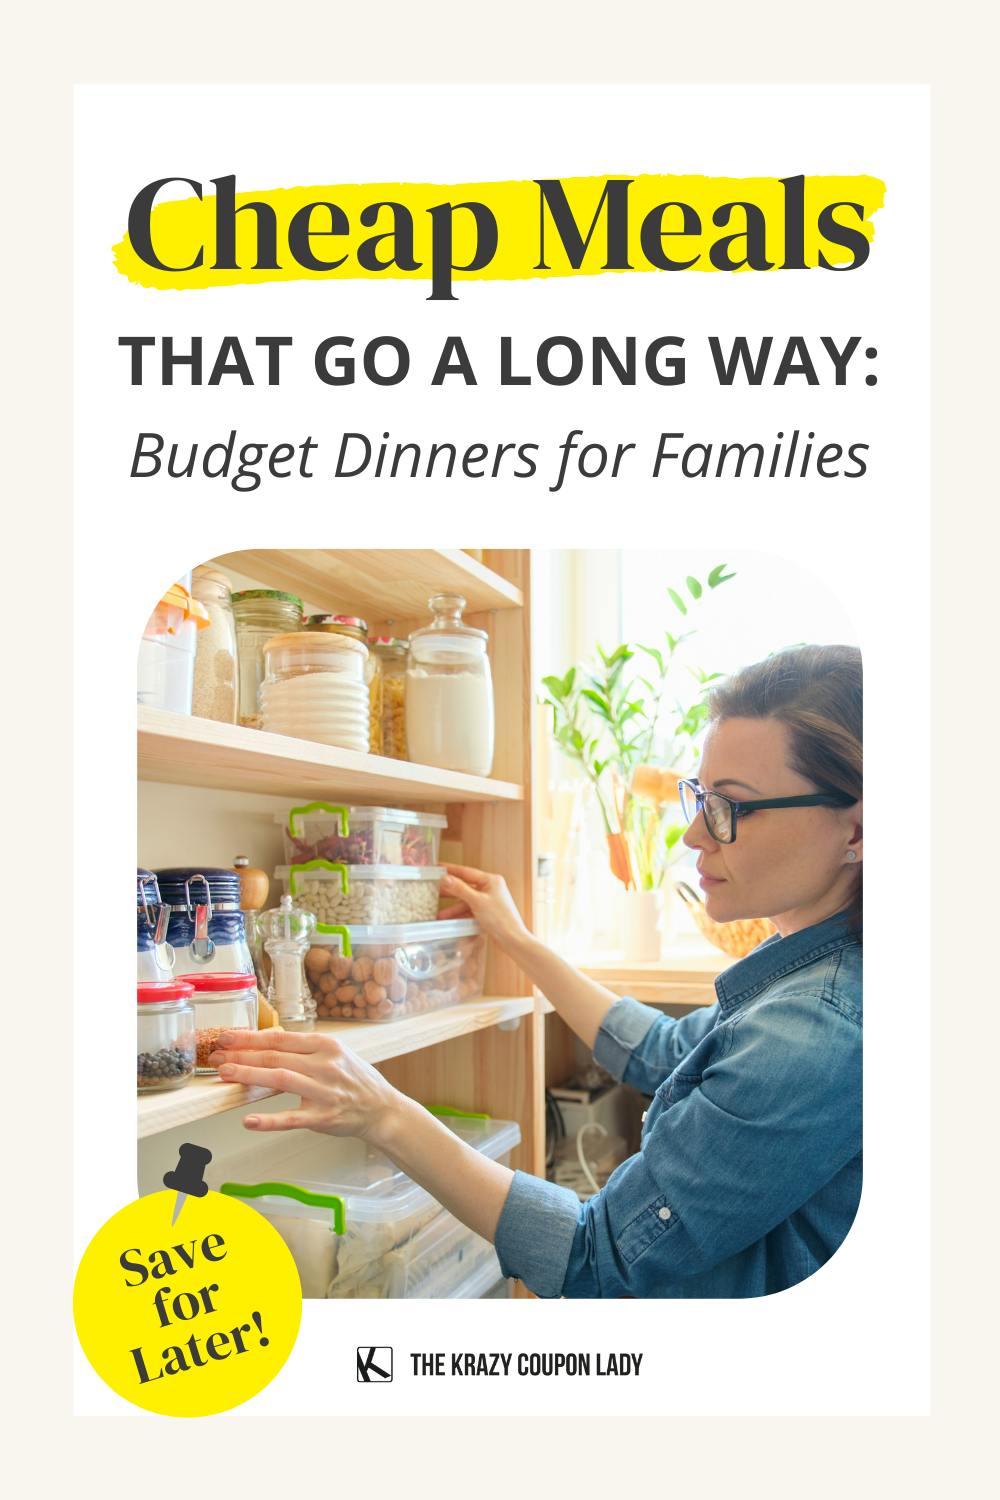 Cheap Meals That Go a Long Way: Budget Dinners for Families